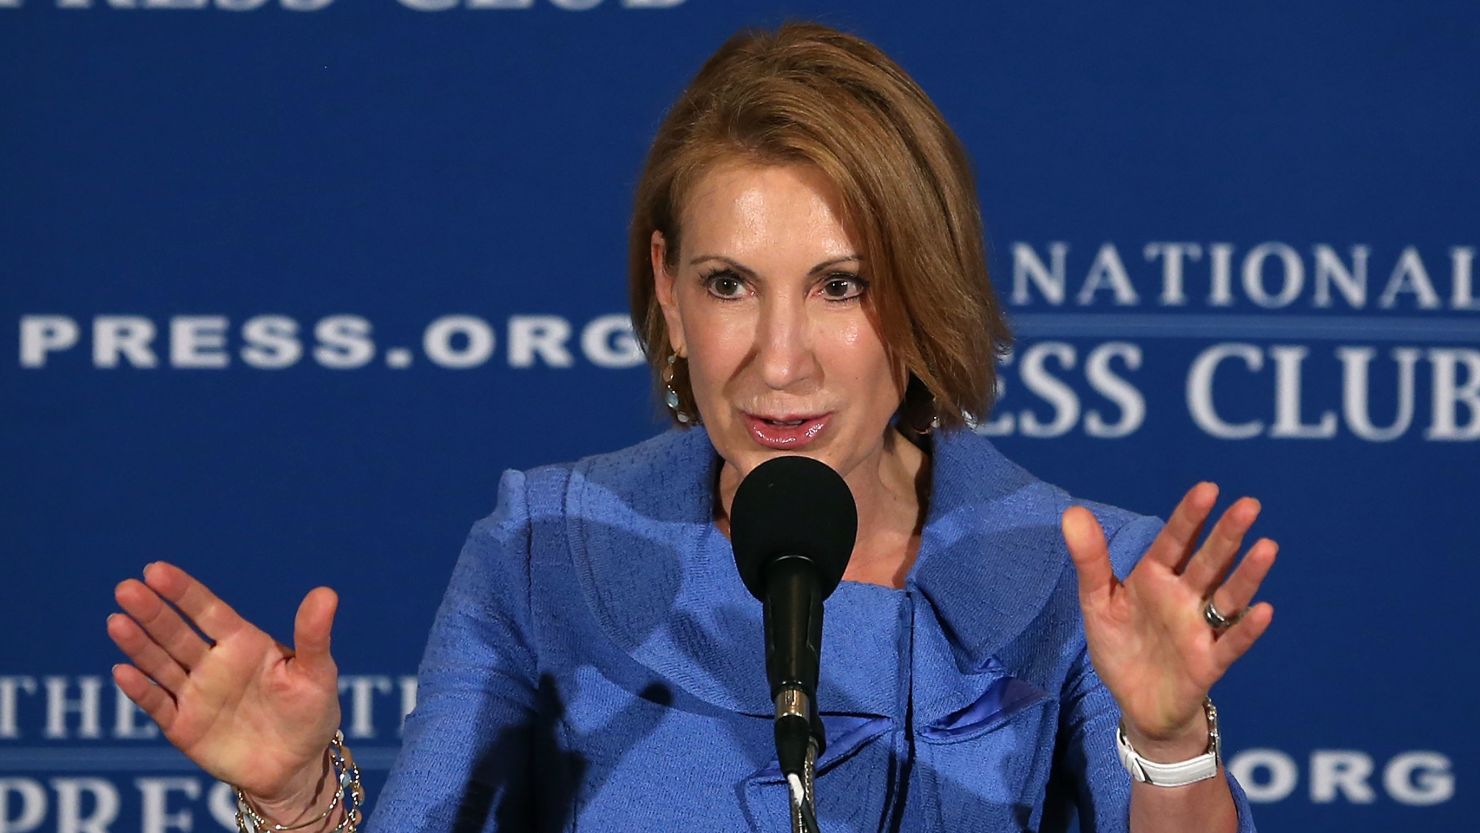 Carly Fiorina, former CEO of Hewlett-Packard, at an event in Washington, D.C. in 2013.